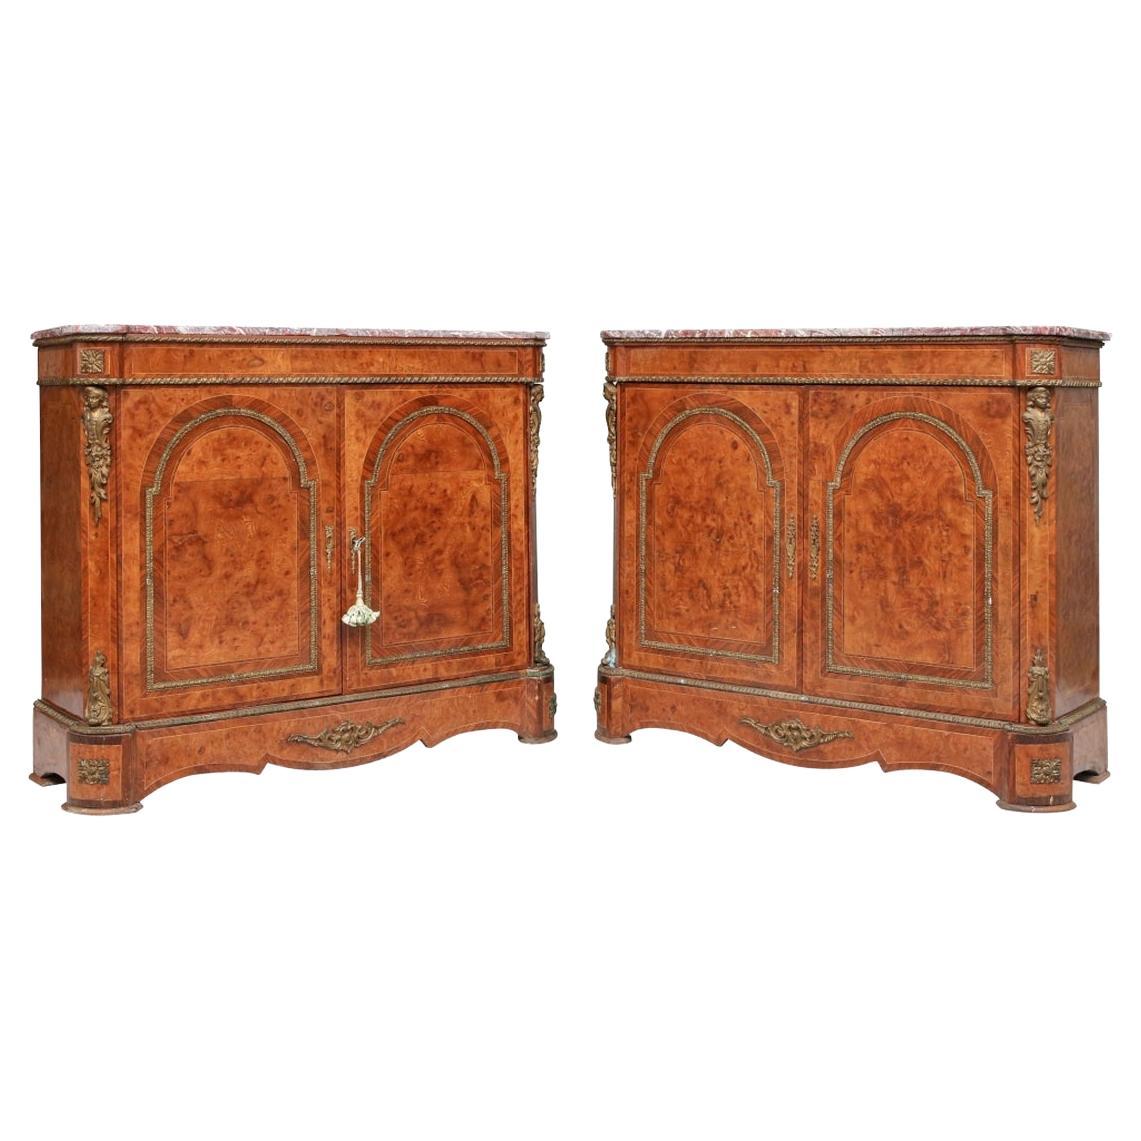 Pair of Exceptional Antique French Marble Top Figured Wood Cabinets For Sale